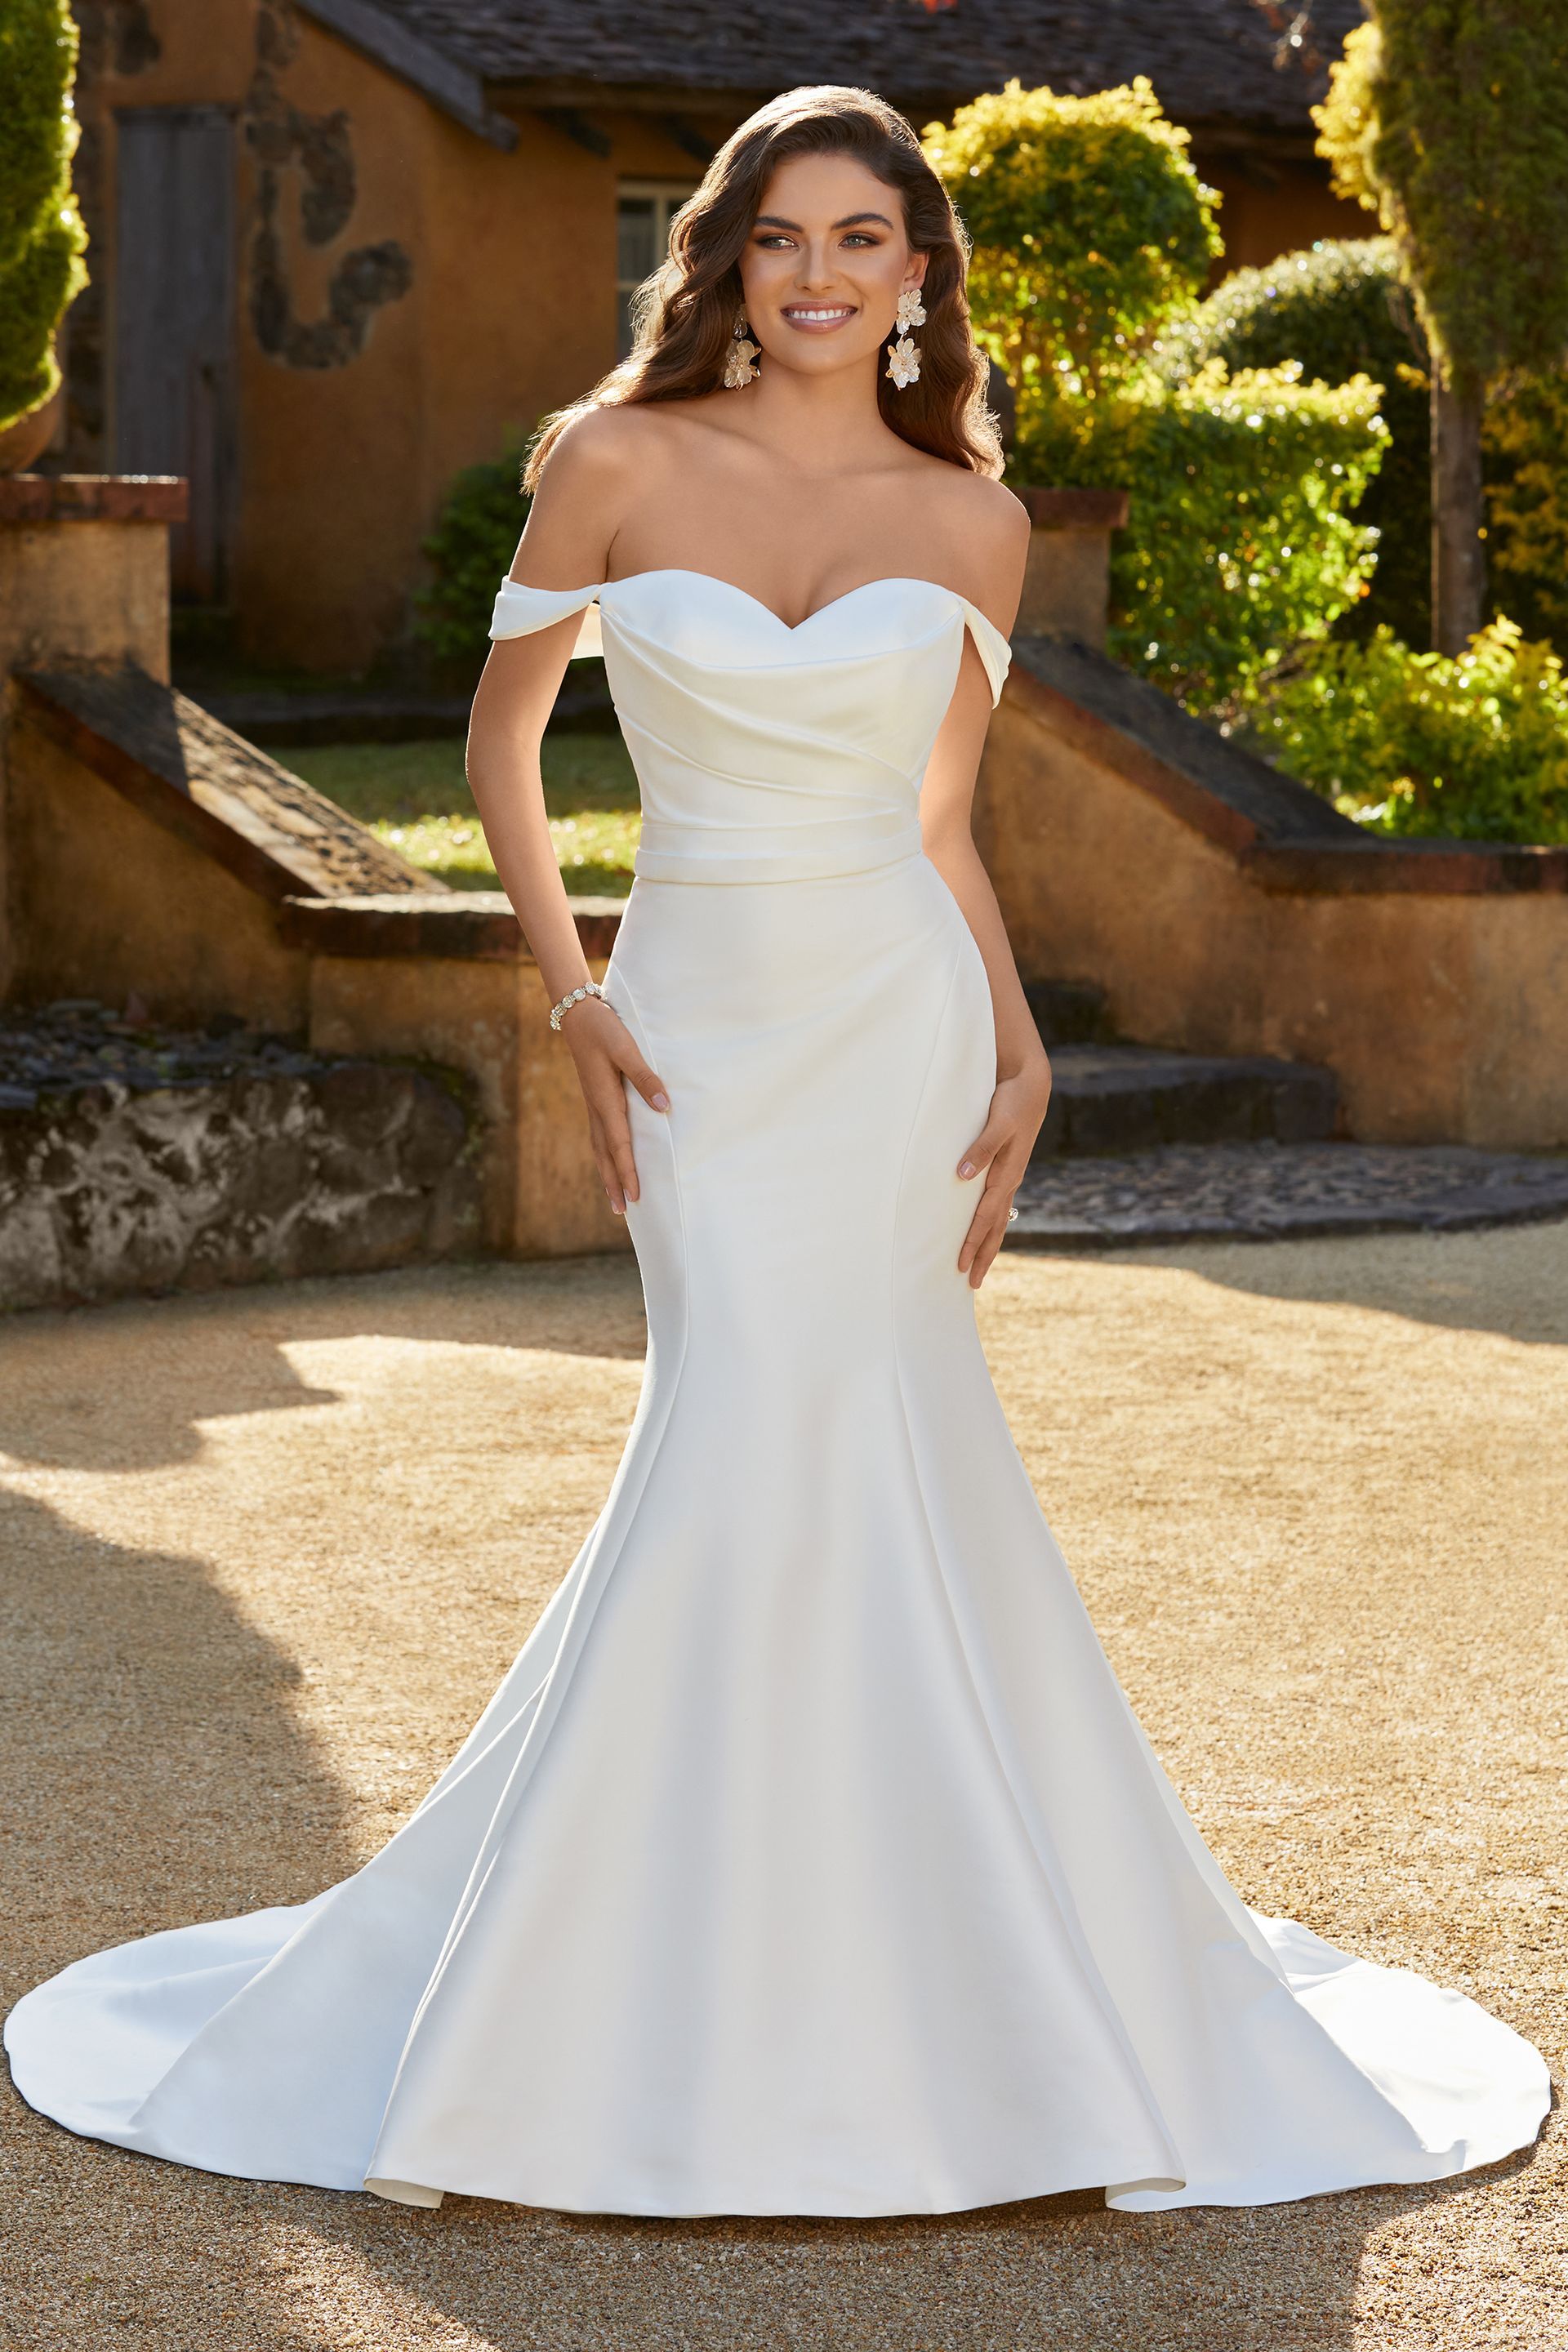 A woman is wearing a white off the shoulder wedding dress.